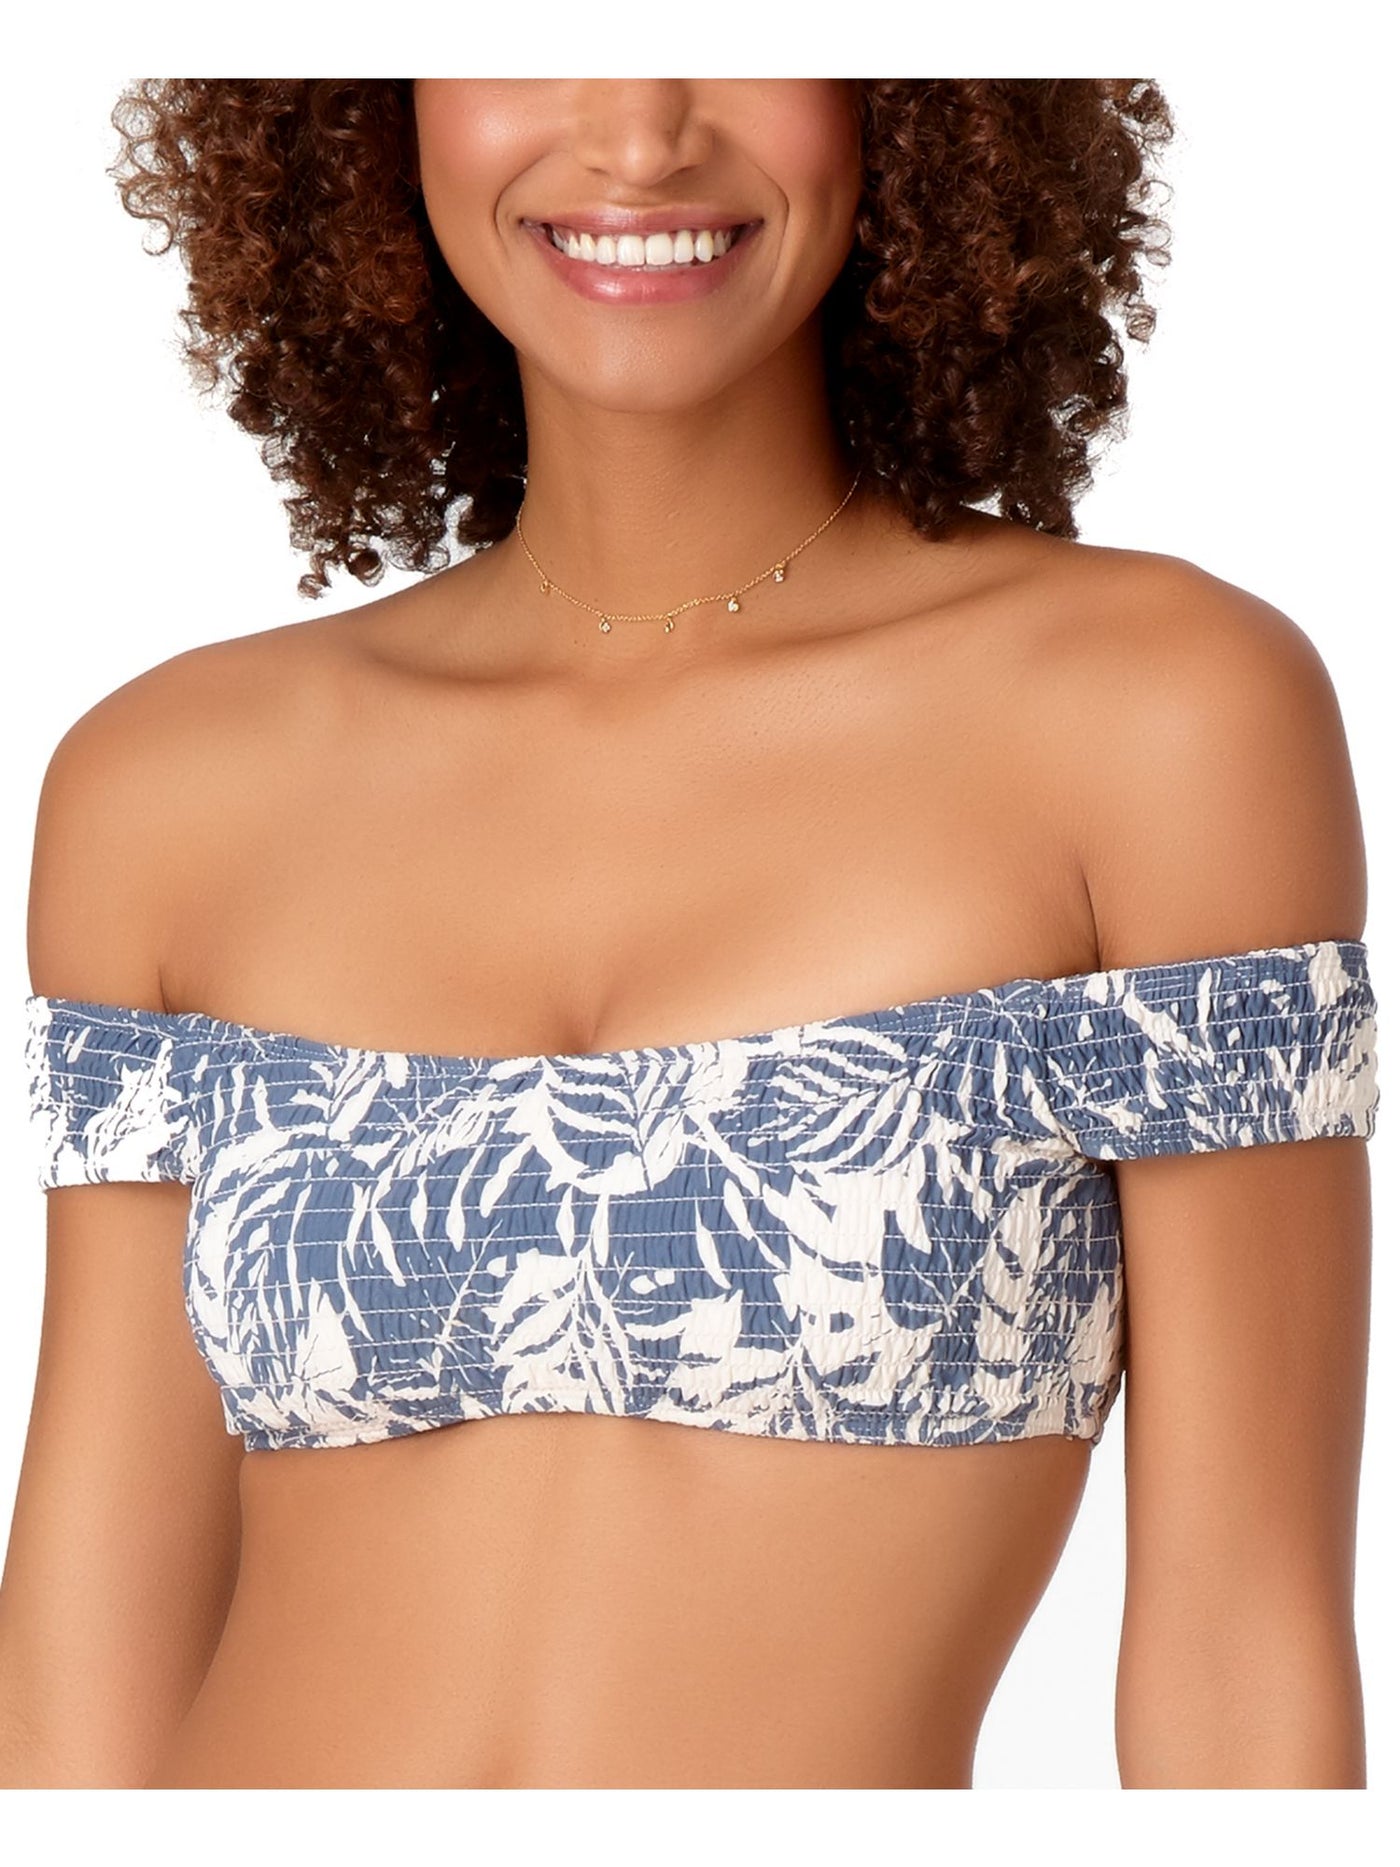 STUDIO ANN COLE Women's Blue Printed Stretch Bandeau Removable Cups Smocked Off The Shoulder Swimsuit Top L